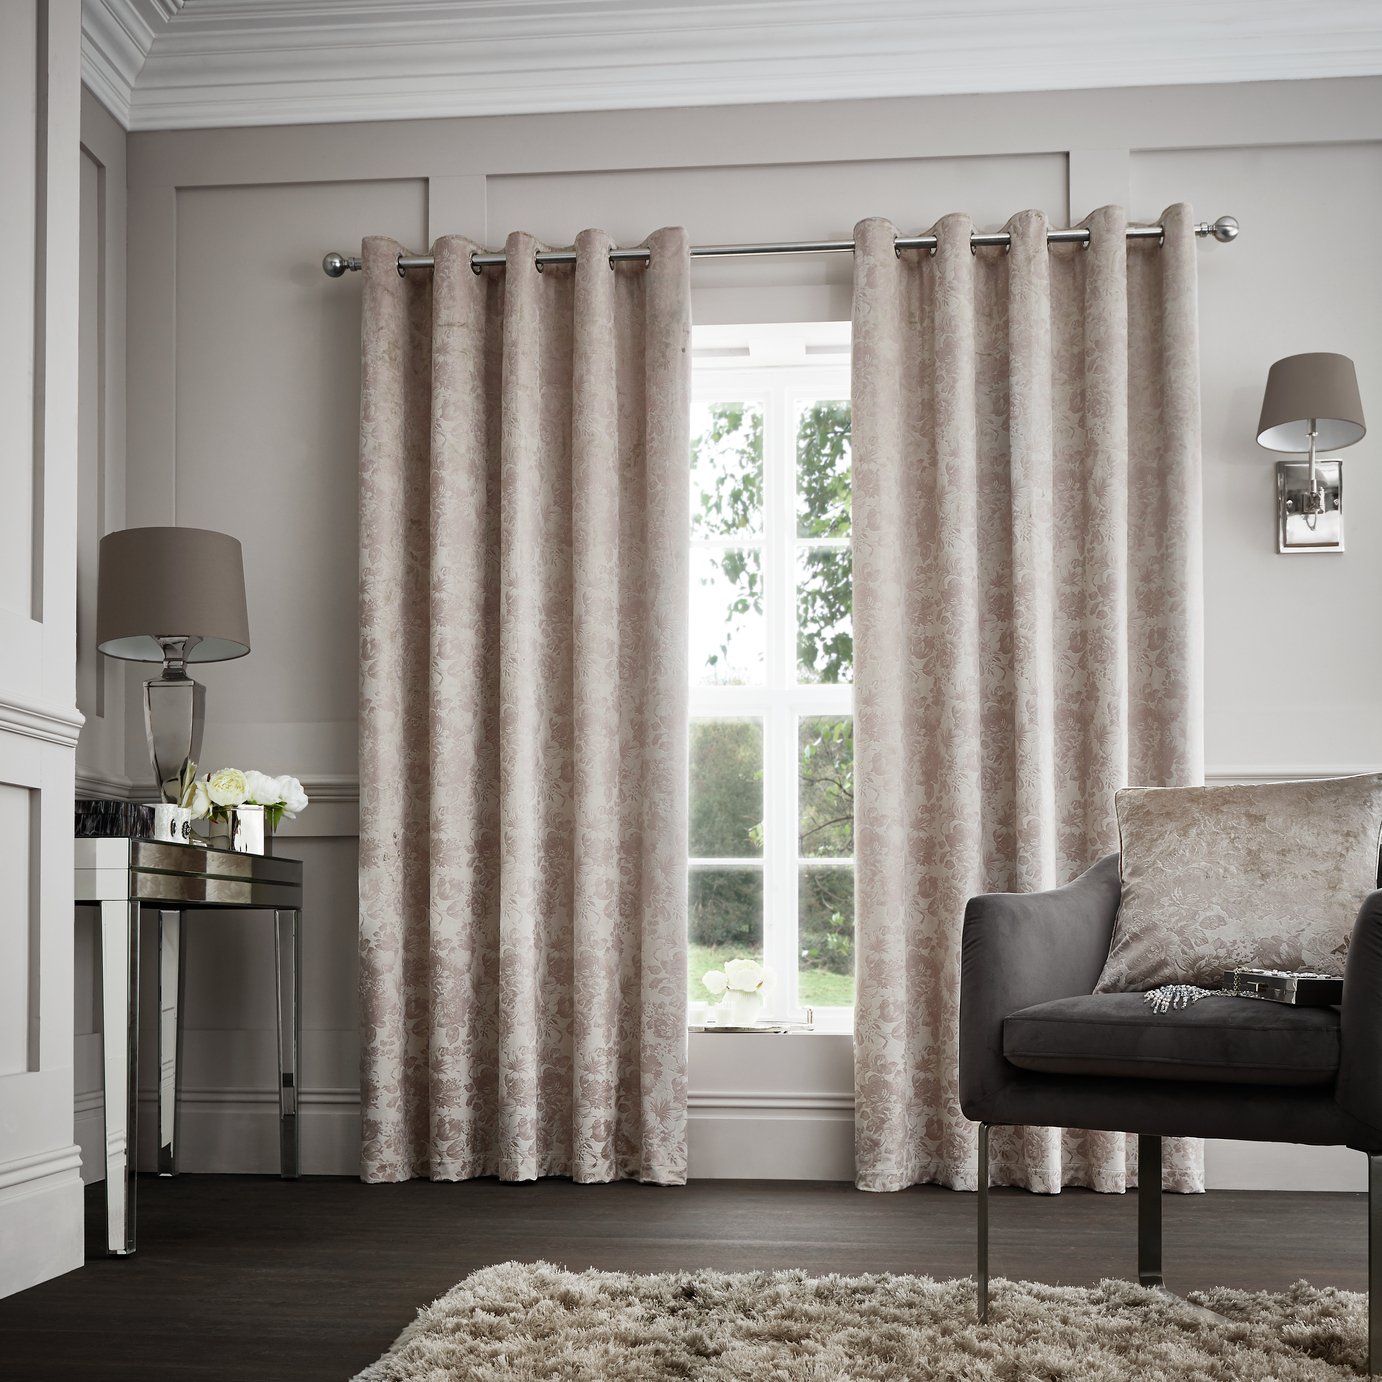 Curtina Downton Lined Curtains - 168x137cm - Mink